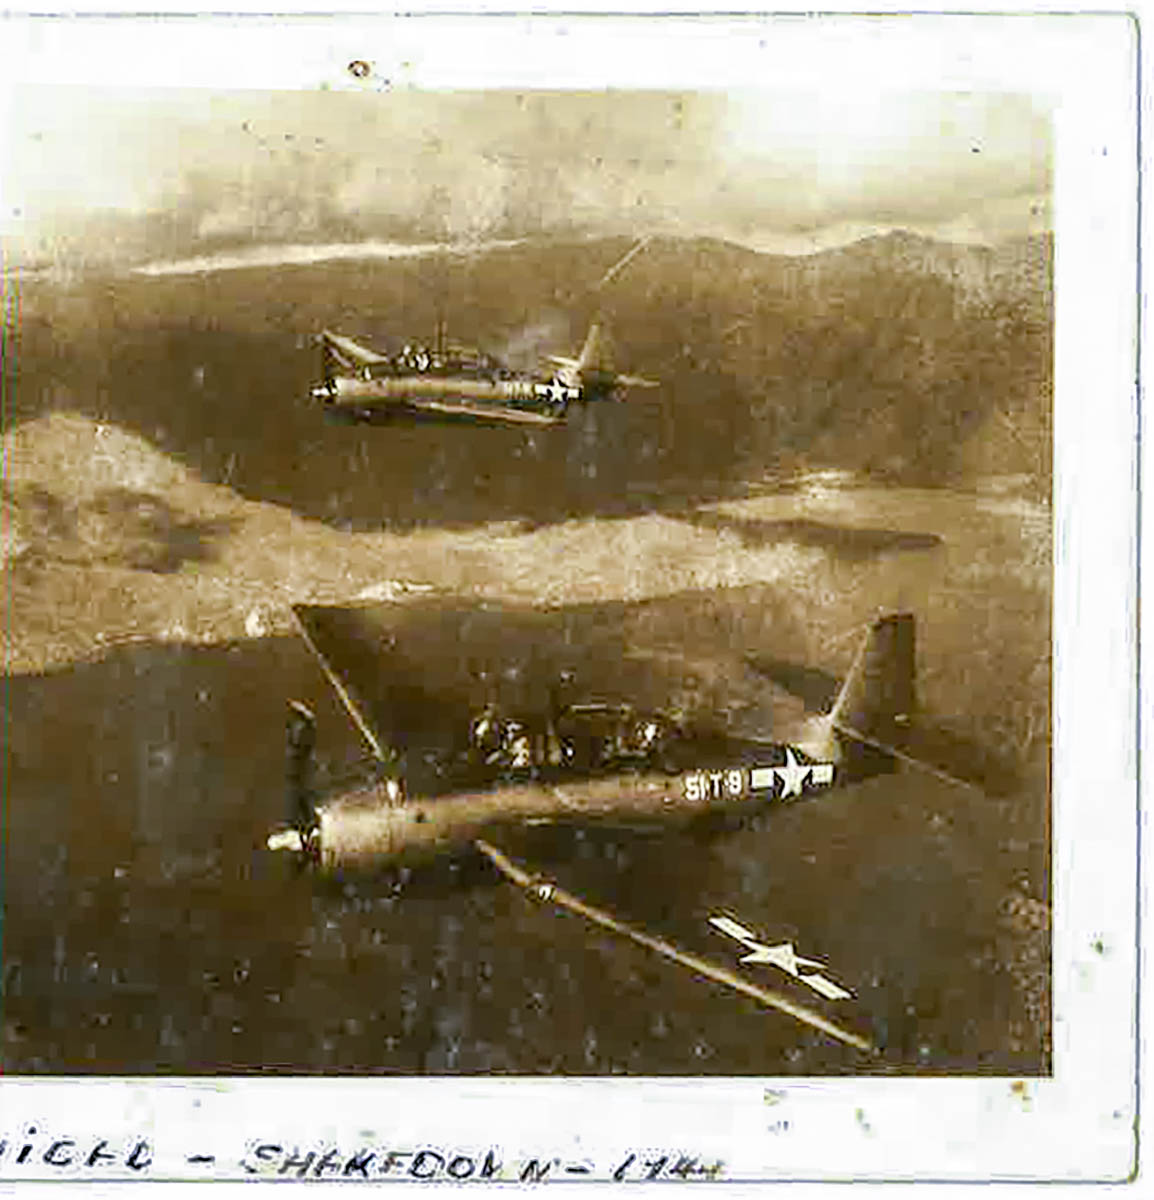 Trinidad Shakedown WWII aircraft fly in formation during WWII